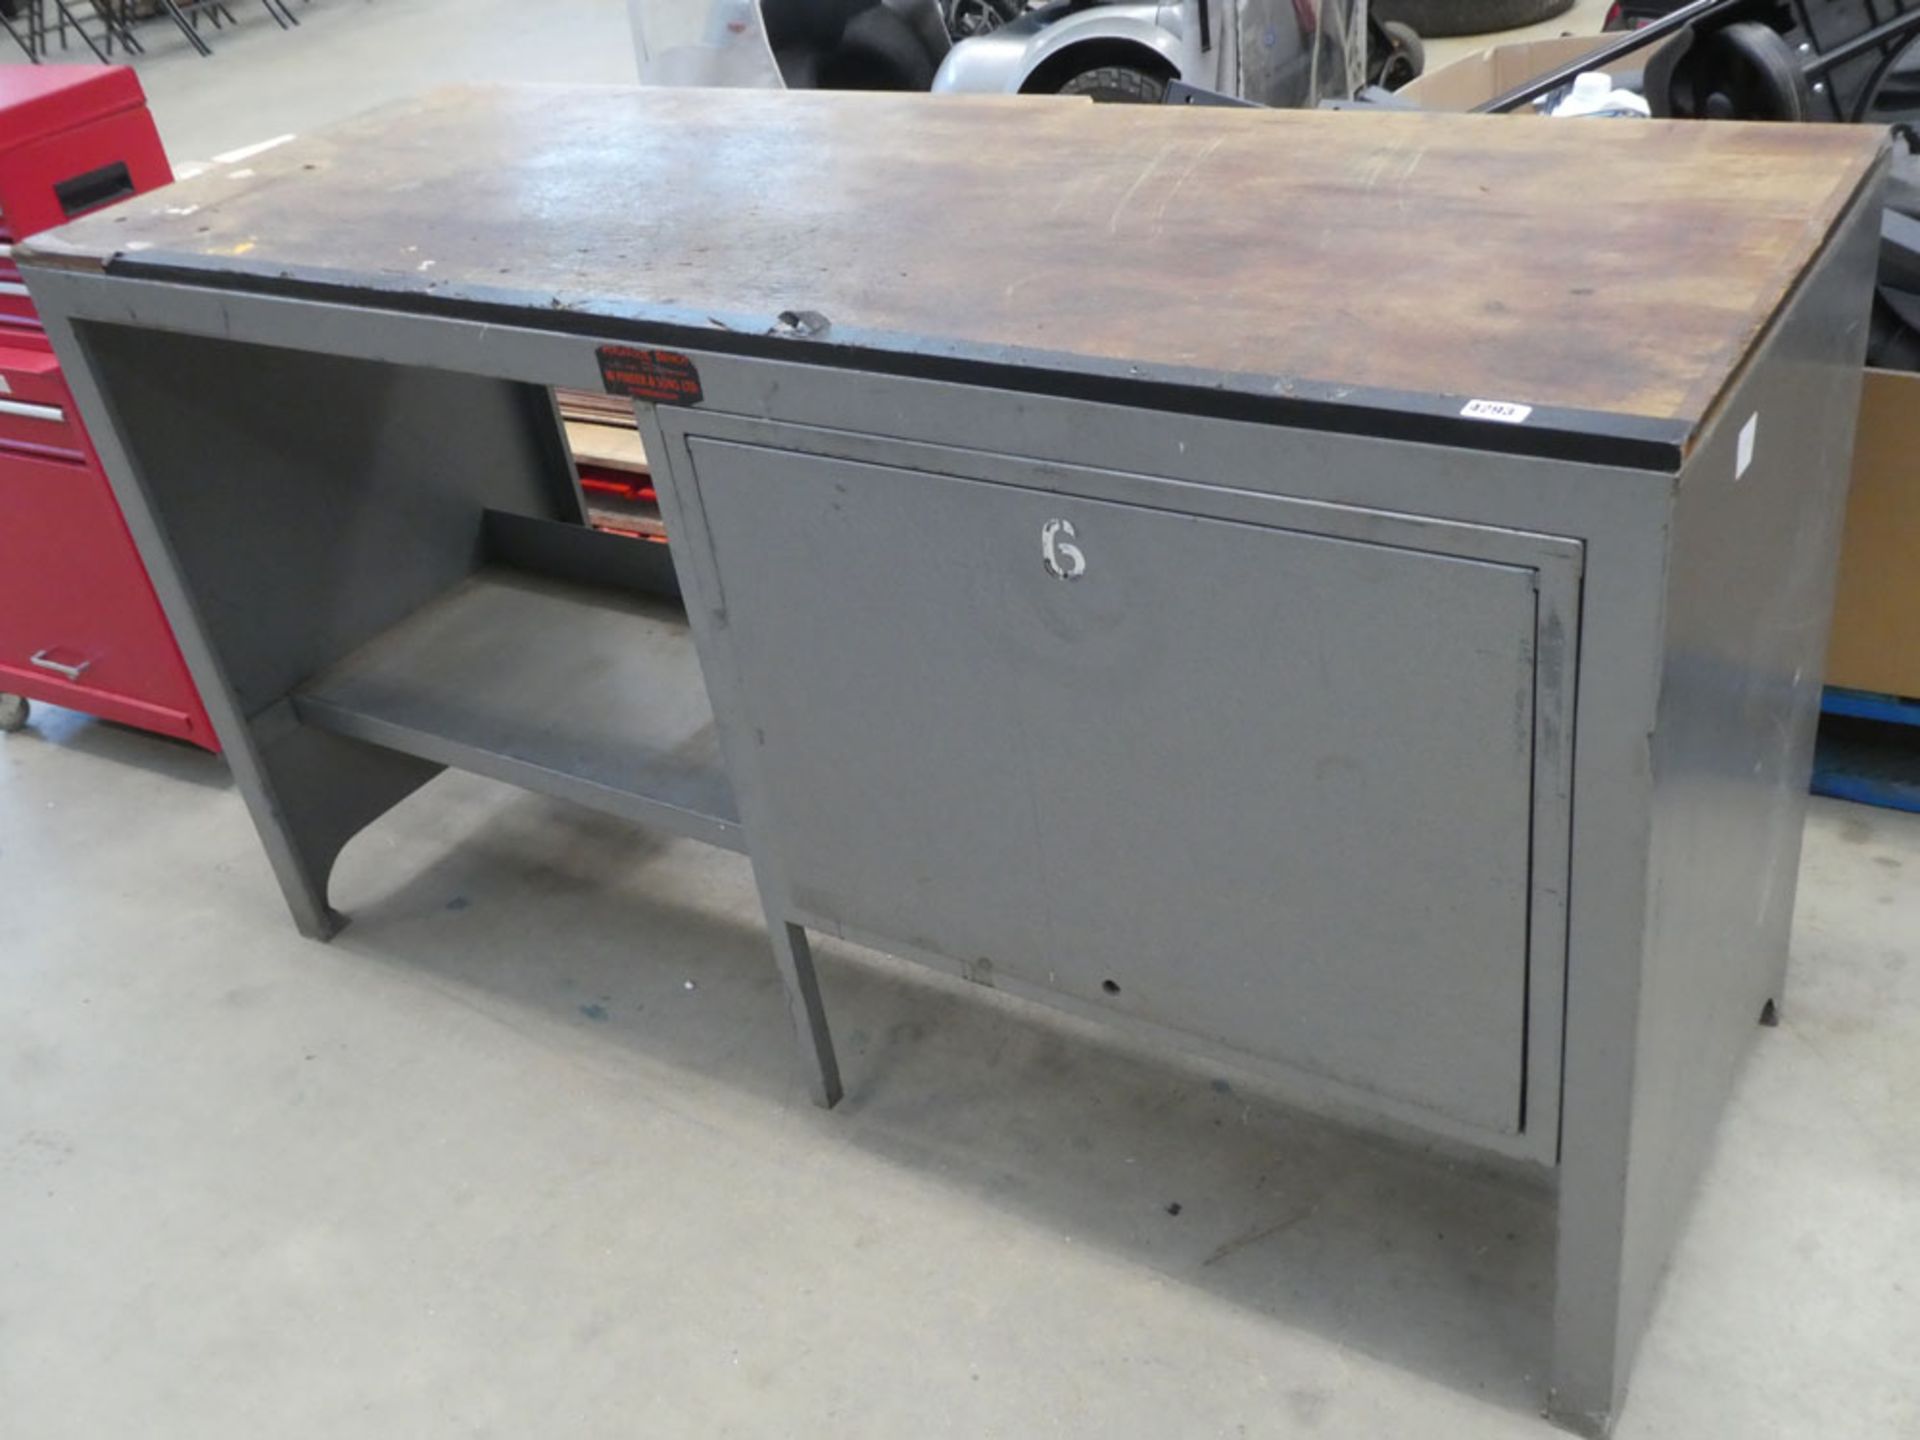 Metal tool bench with cupboard under